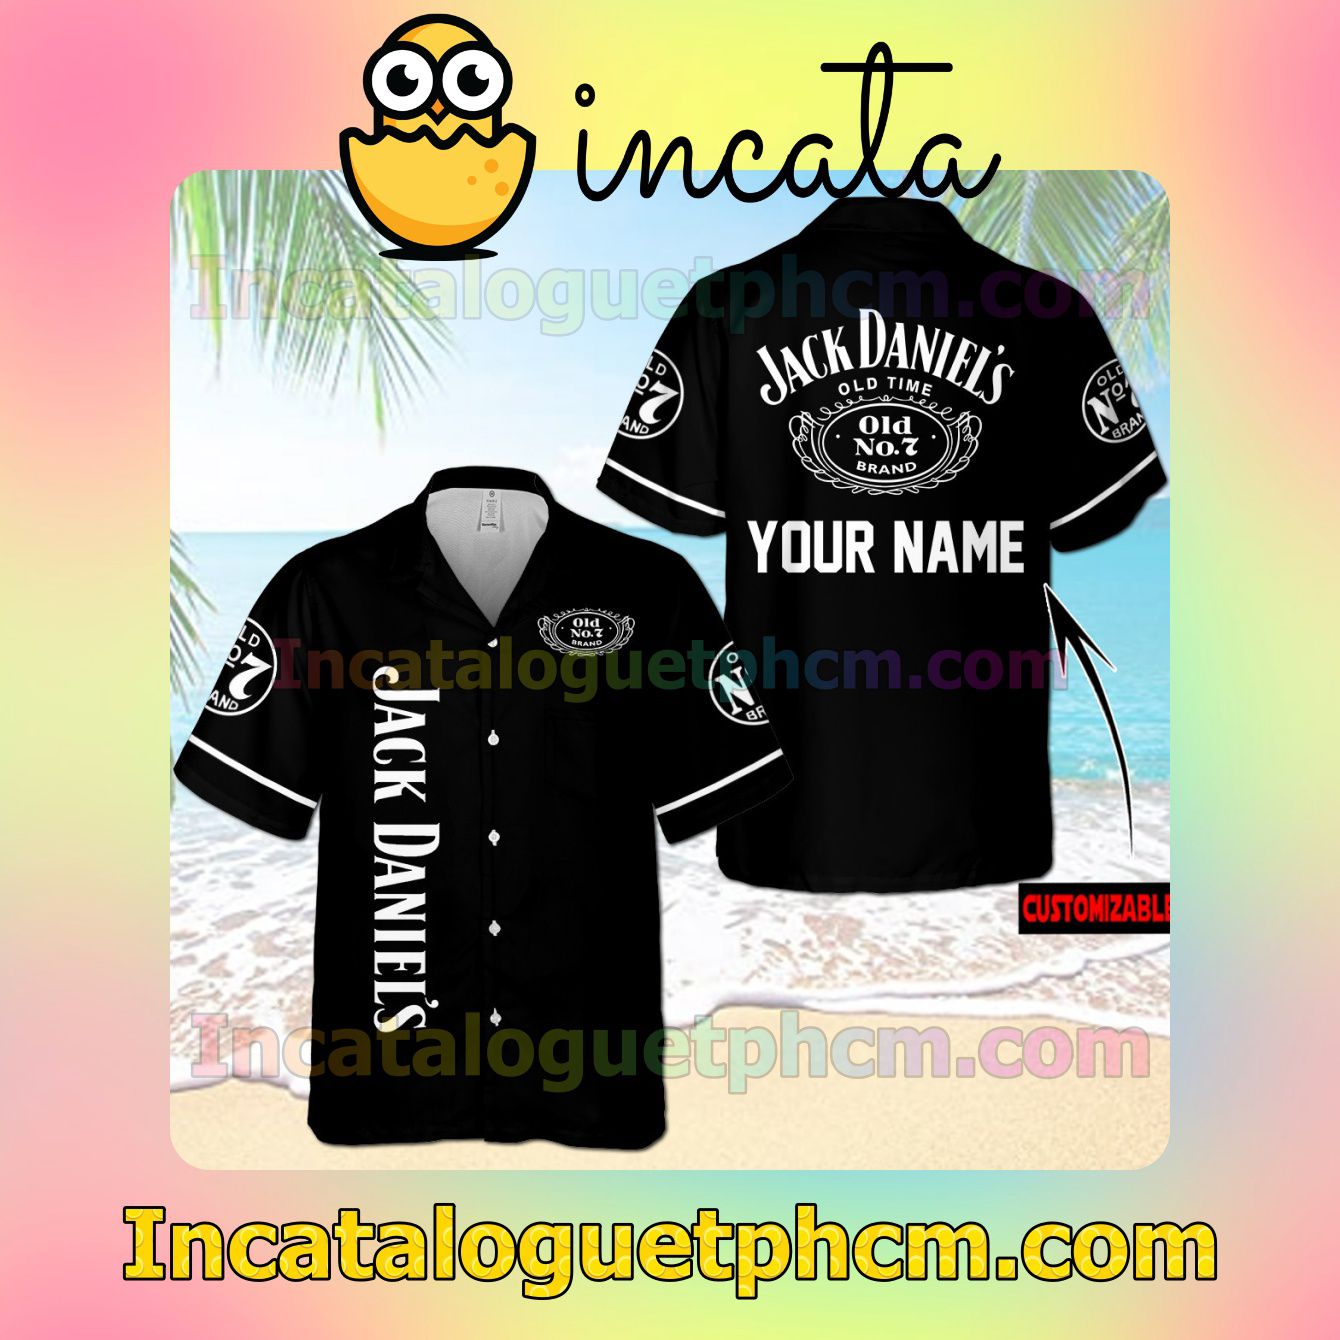 Personalized Jack Daniel's Old Time Black Button Shirt And Swim Trunk